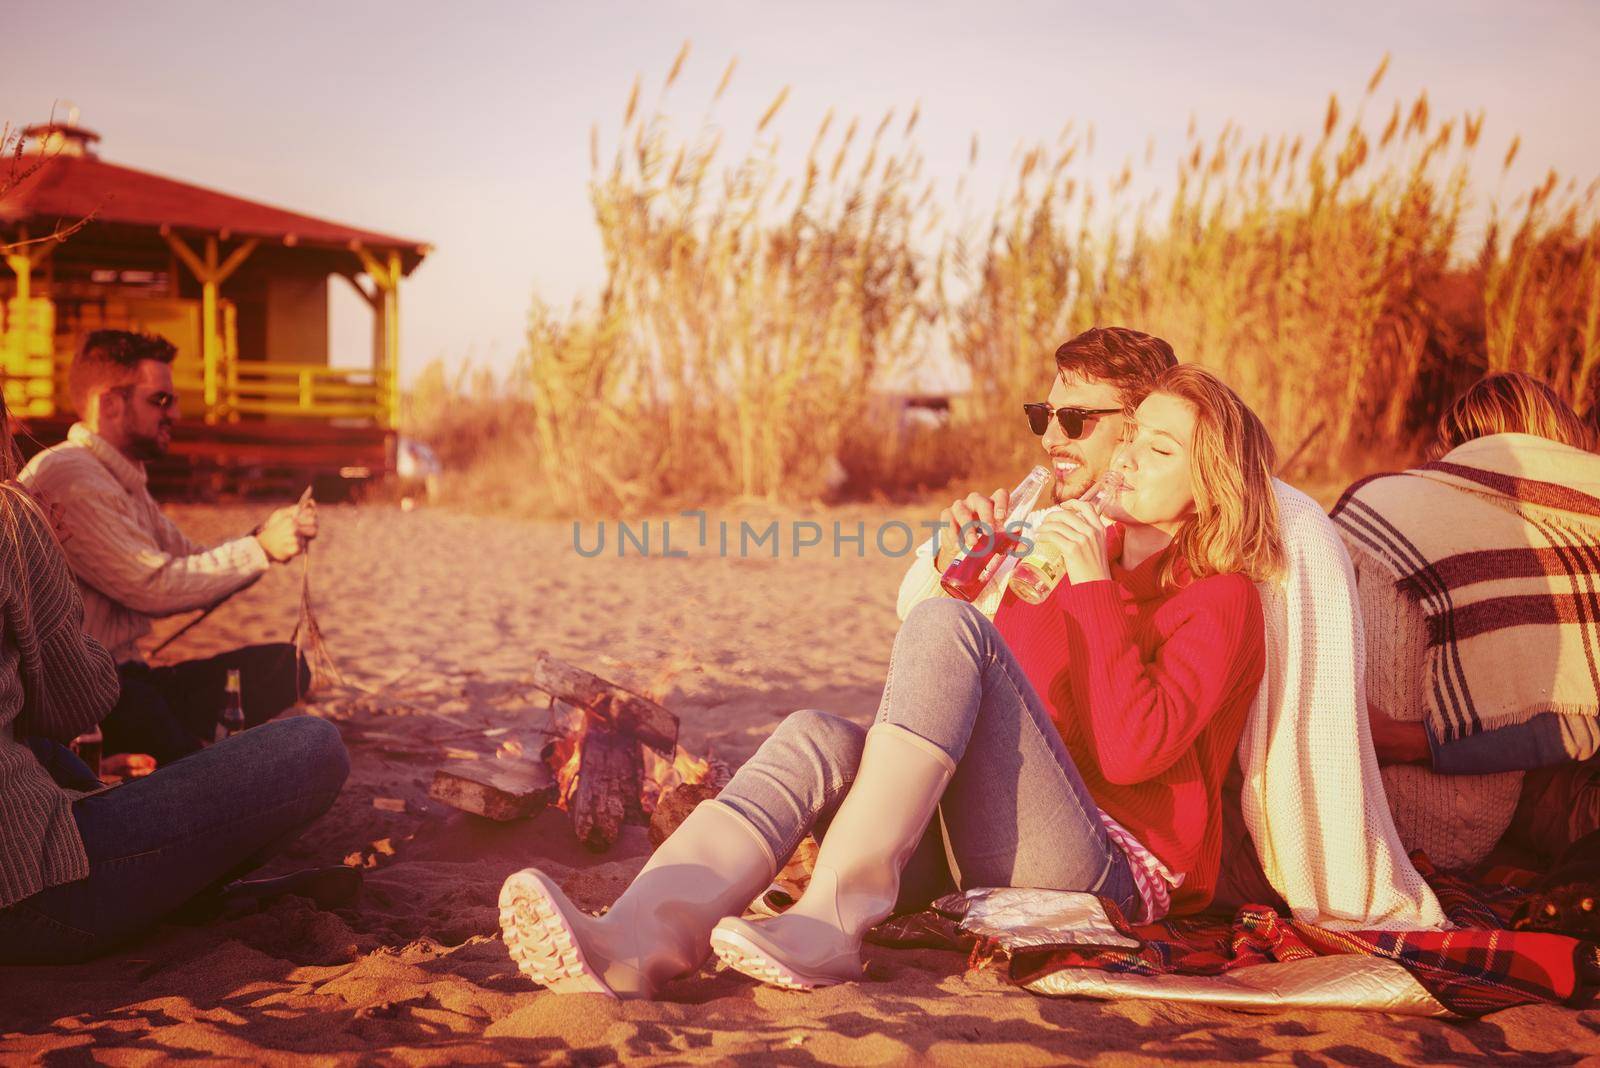 Young Couple enjoying with friends Around Campfire on The Beach At sunset drinking beer filter